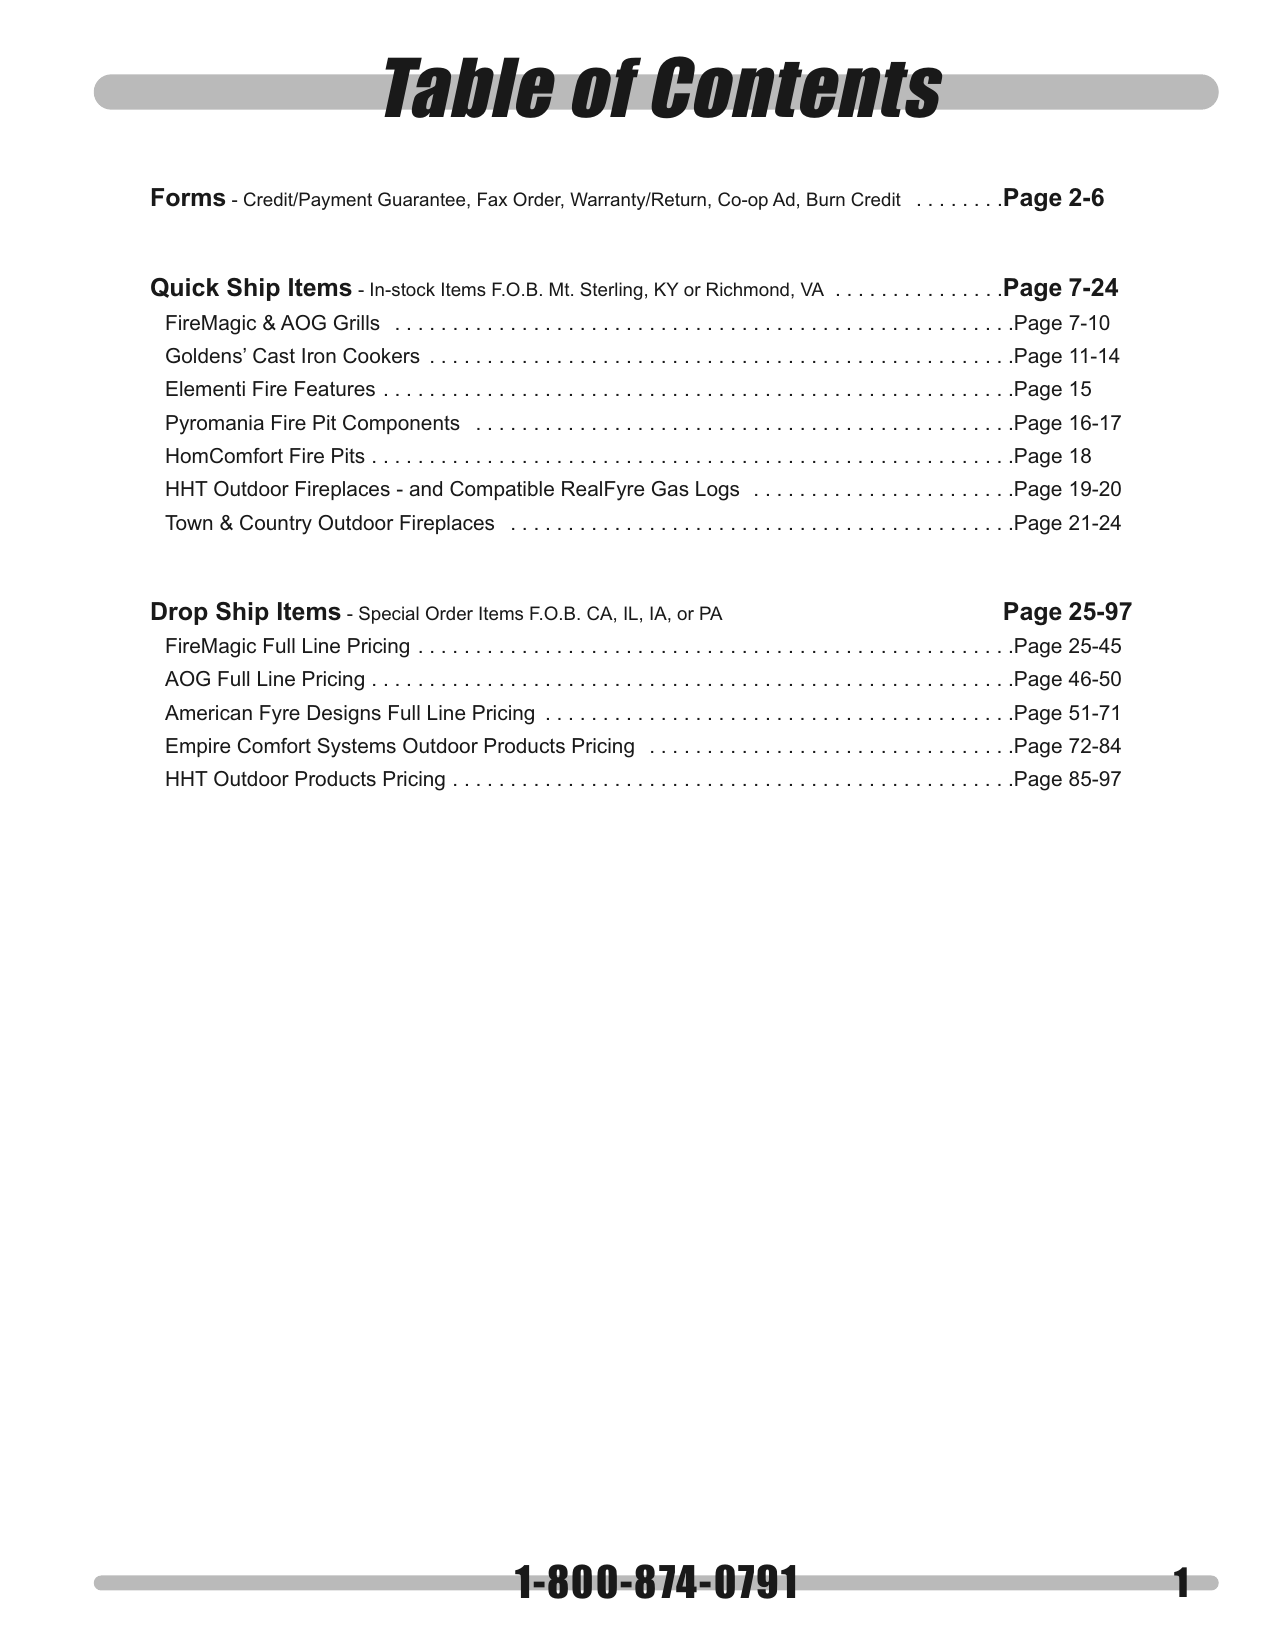 Monessen Fireplace Parts Lovely Table Of Contents